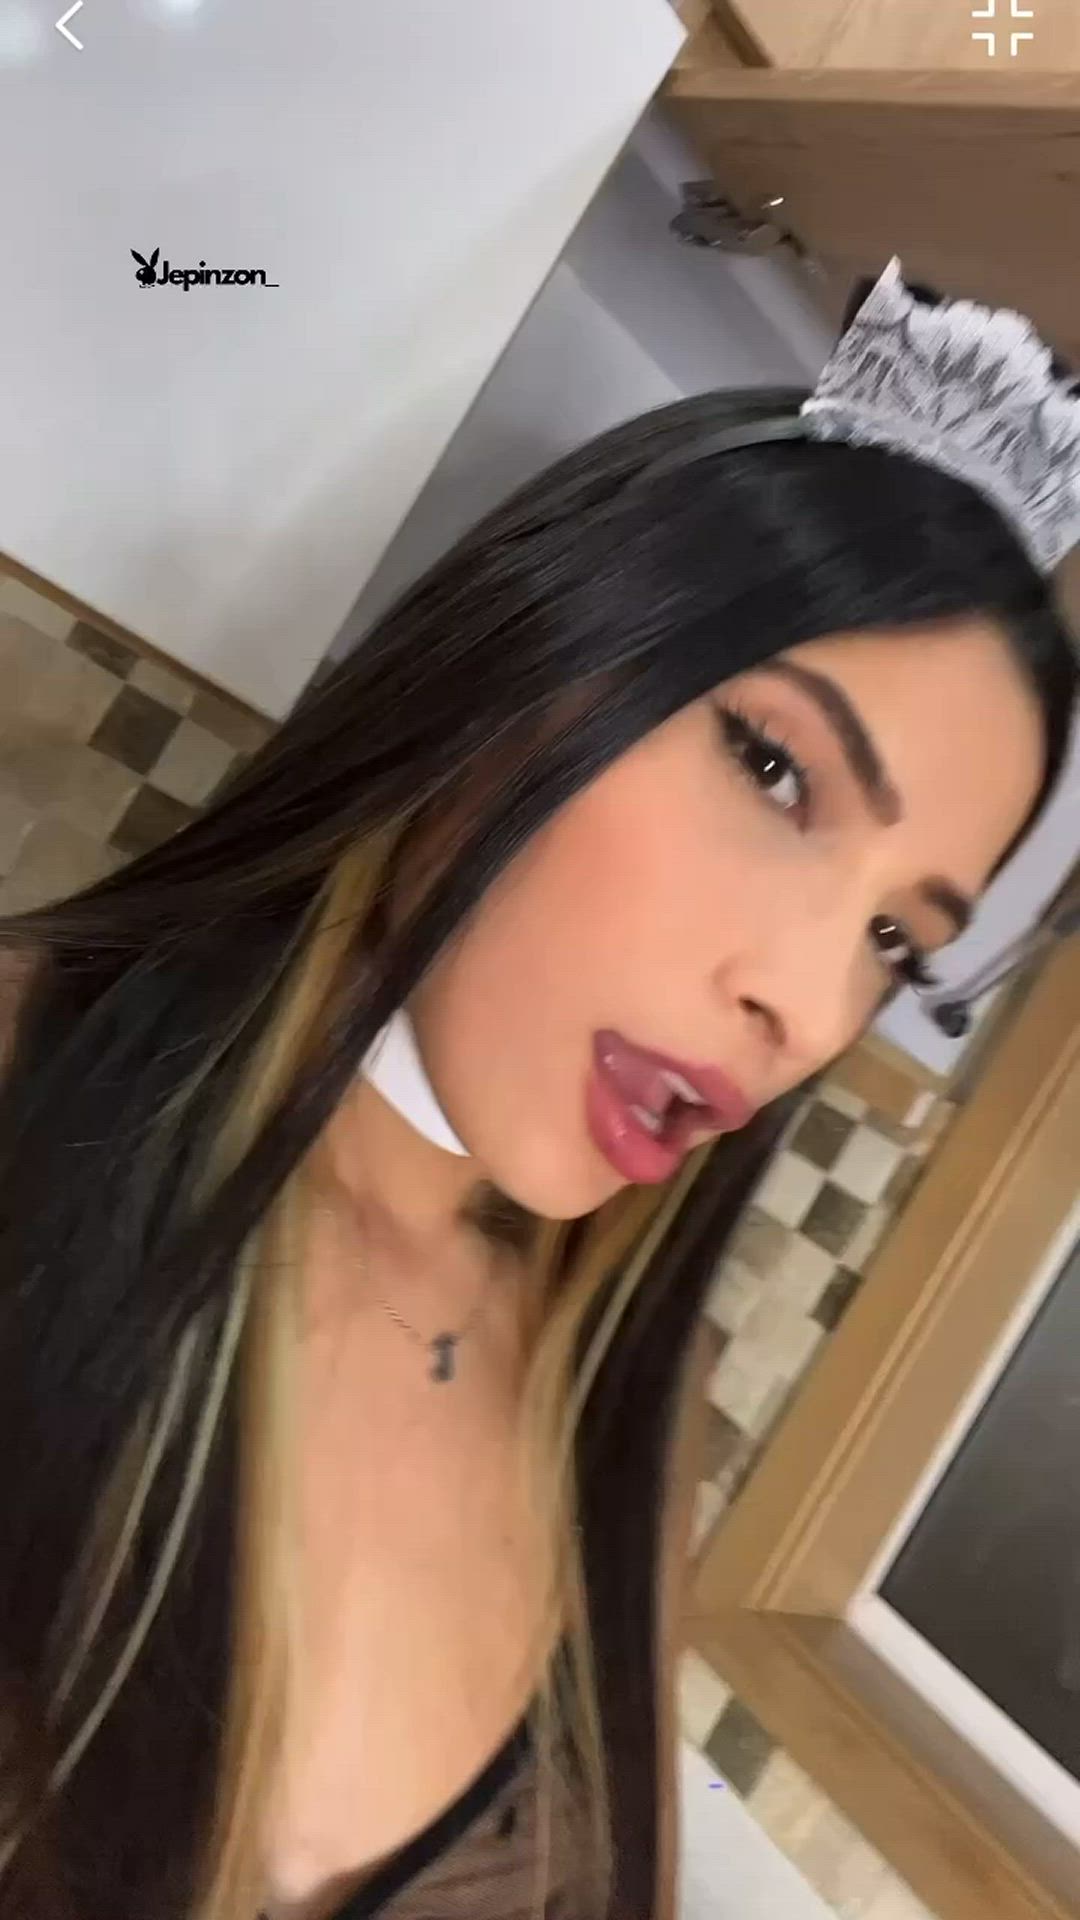 Blowjob porn video with onlyfans model Jepinzon_ Onlyfans <strong>@jepinzon_</strong>